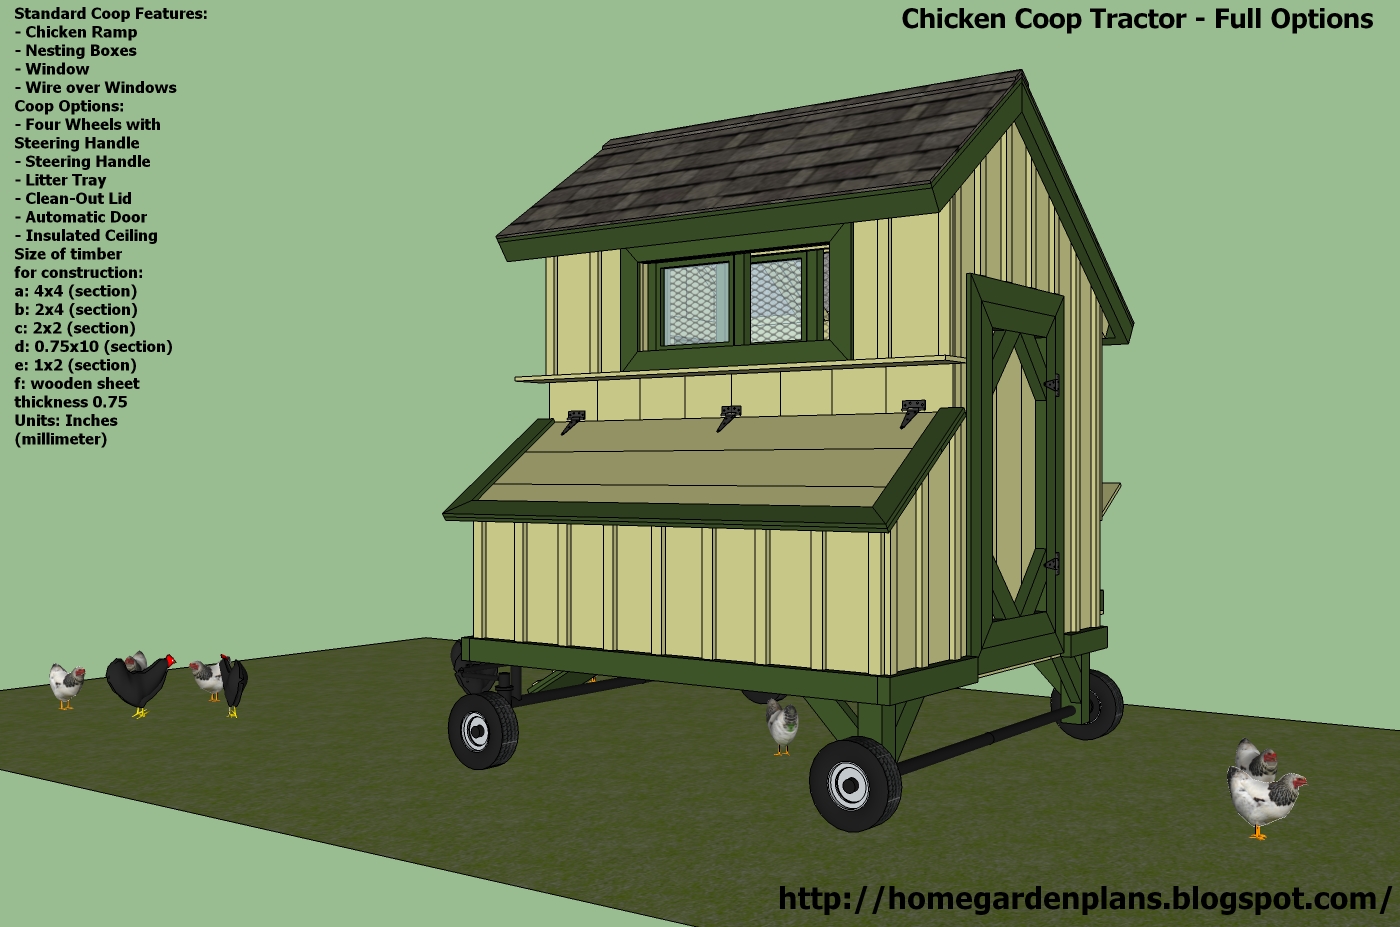 T200 - Chicken Coop Tractor Plans - Free Chicken Coop Plans - How To 